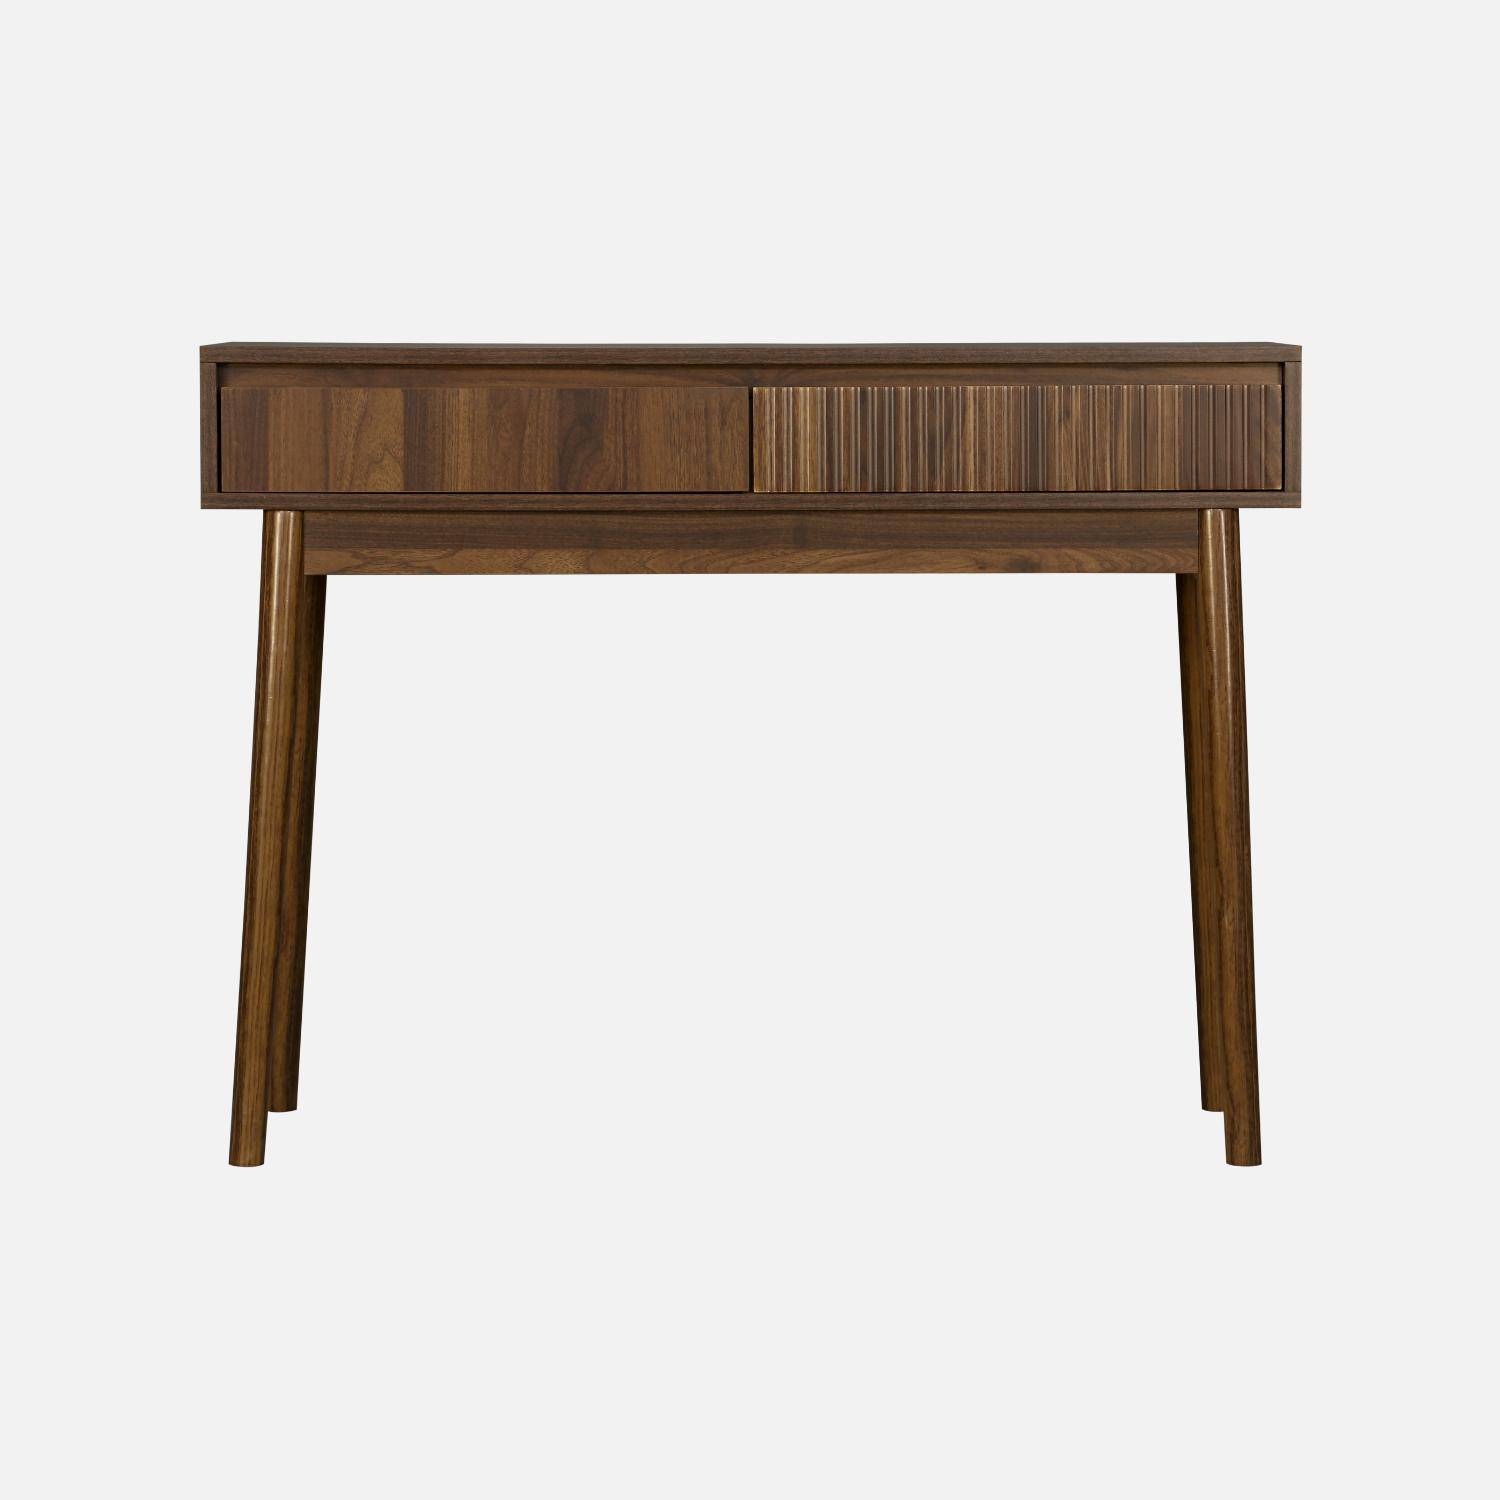 Grooved wood detail console table, 100x30x75cm, Linear, Dark wood colour,sweeek,Photo4